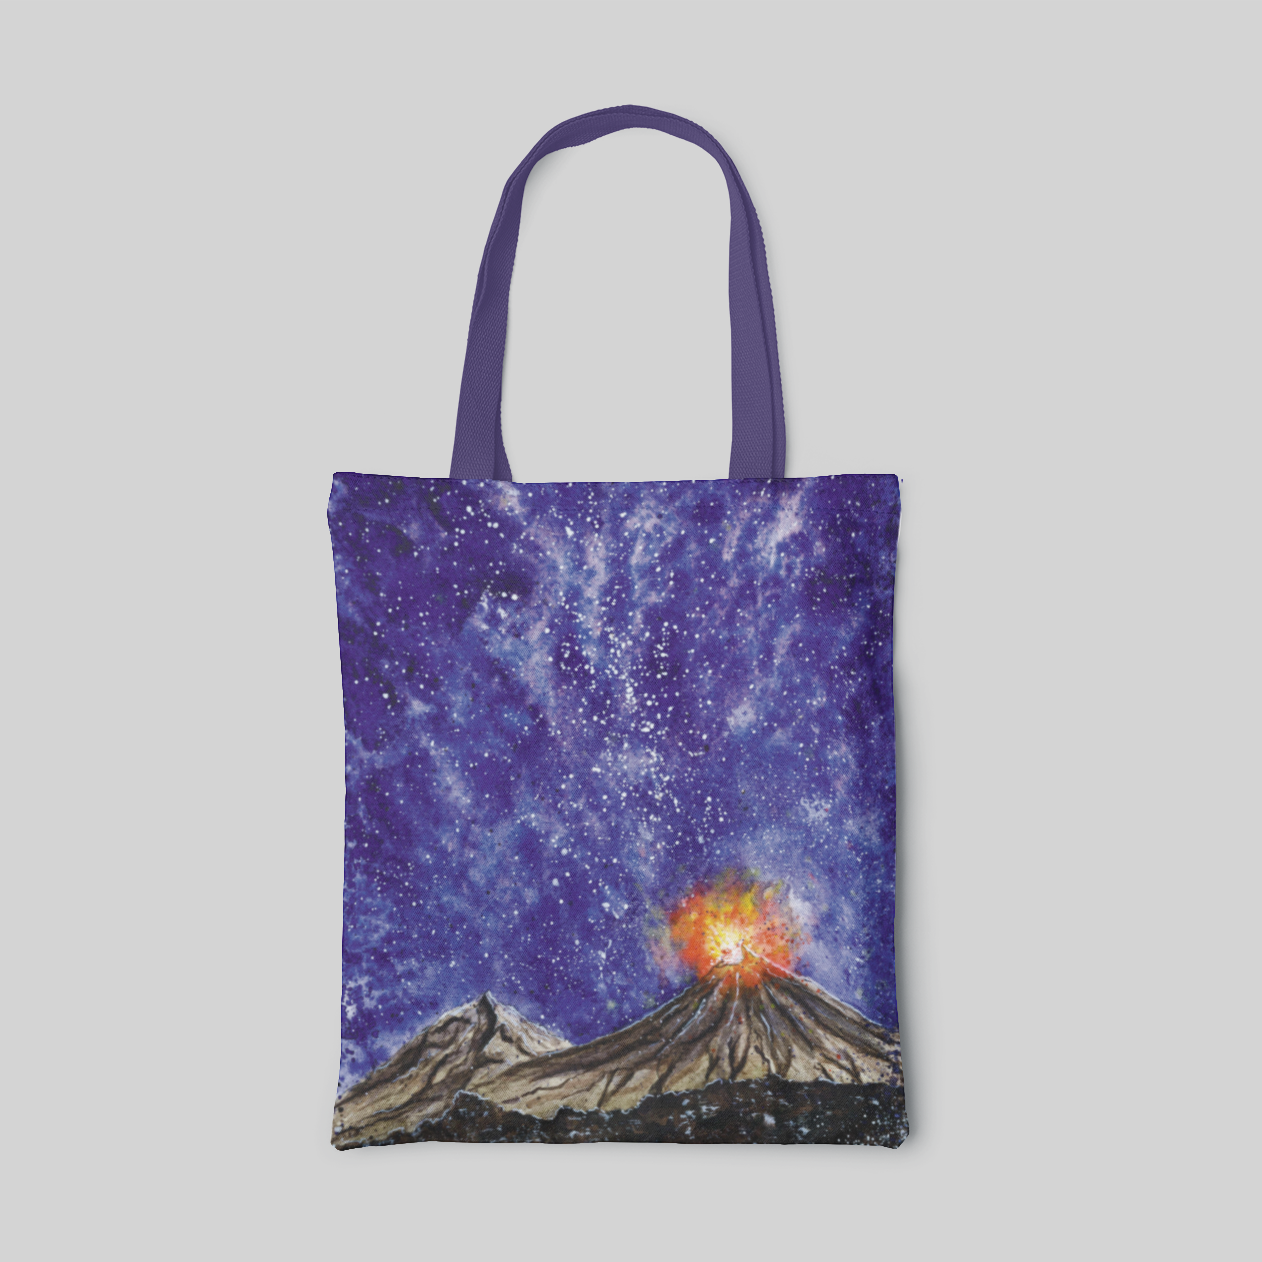 bluish purple landscape designed tote bag with starry night sky and erupting volcano print, front side